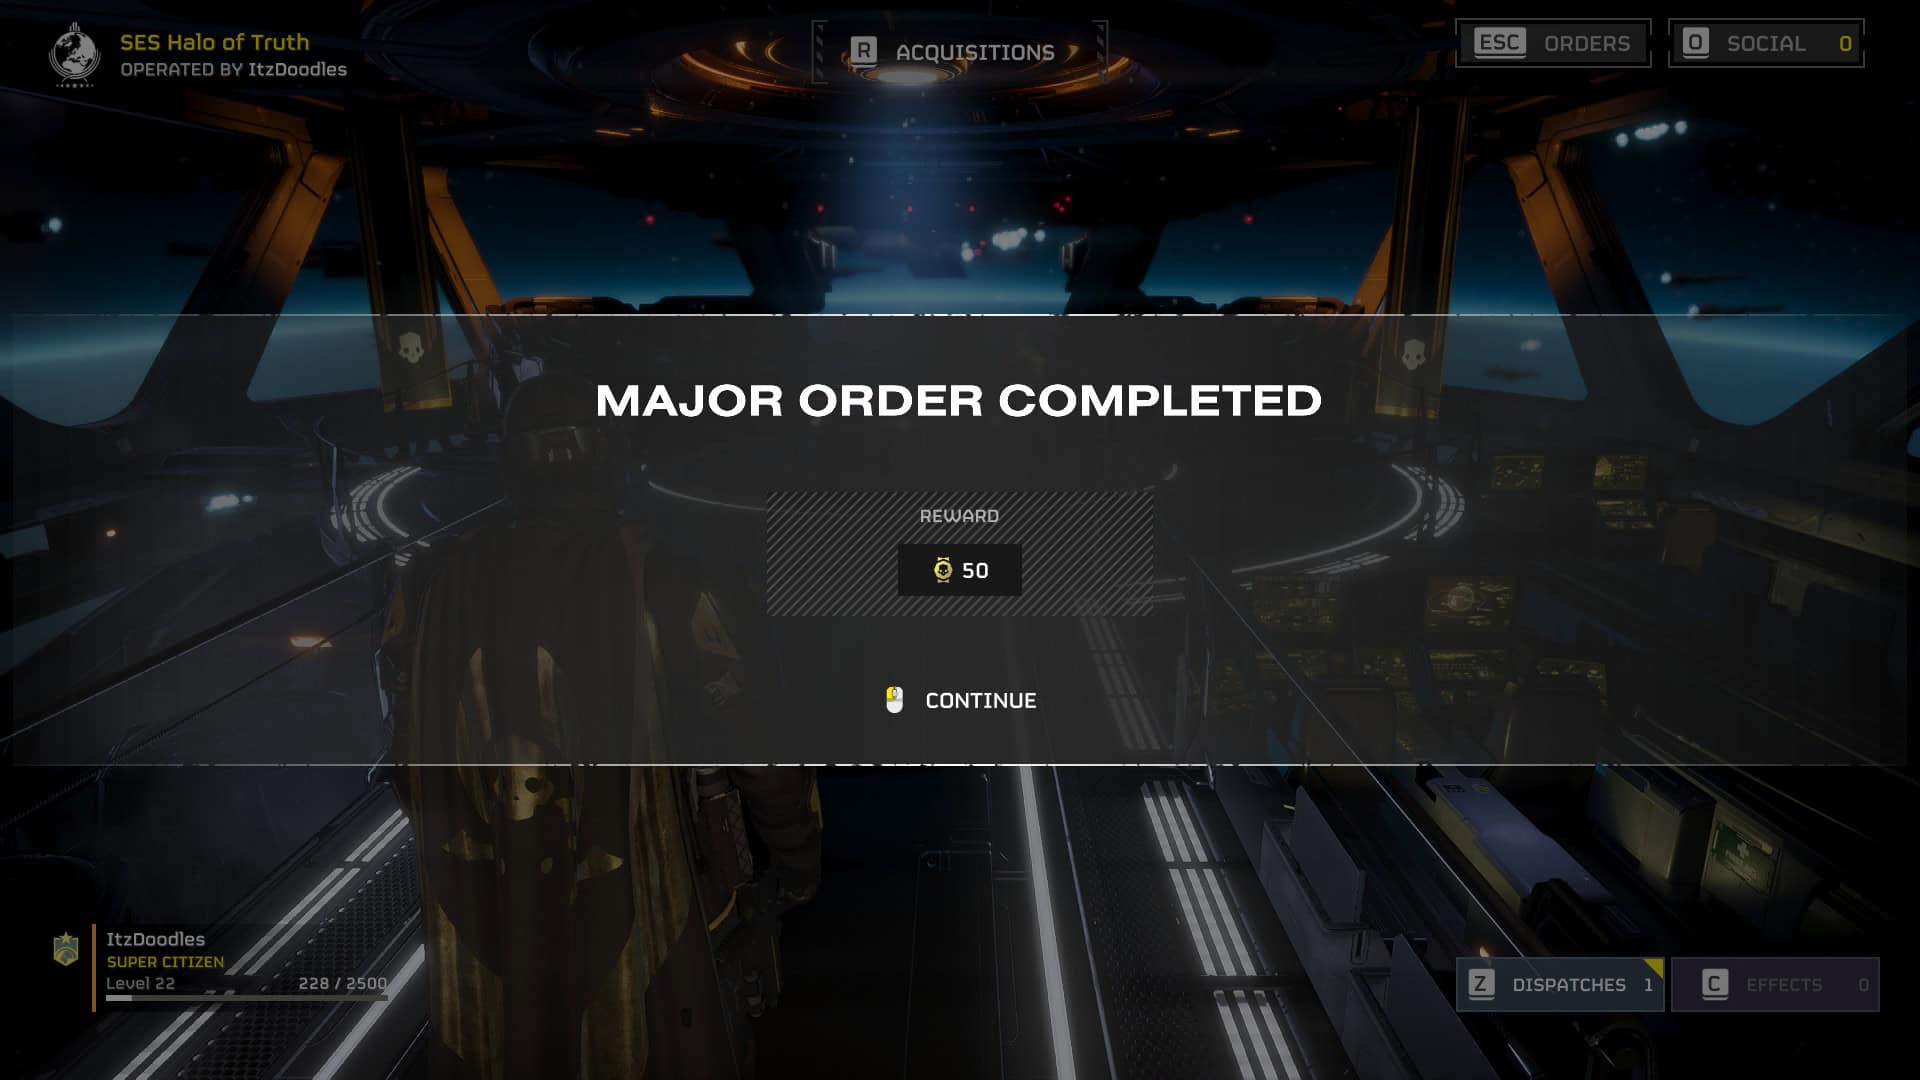 In-game screenshot from "Helldivers 2" showing a "major order completed" notification with a reward of 50 coins on a spaceship bridge interface.